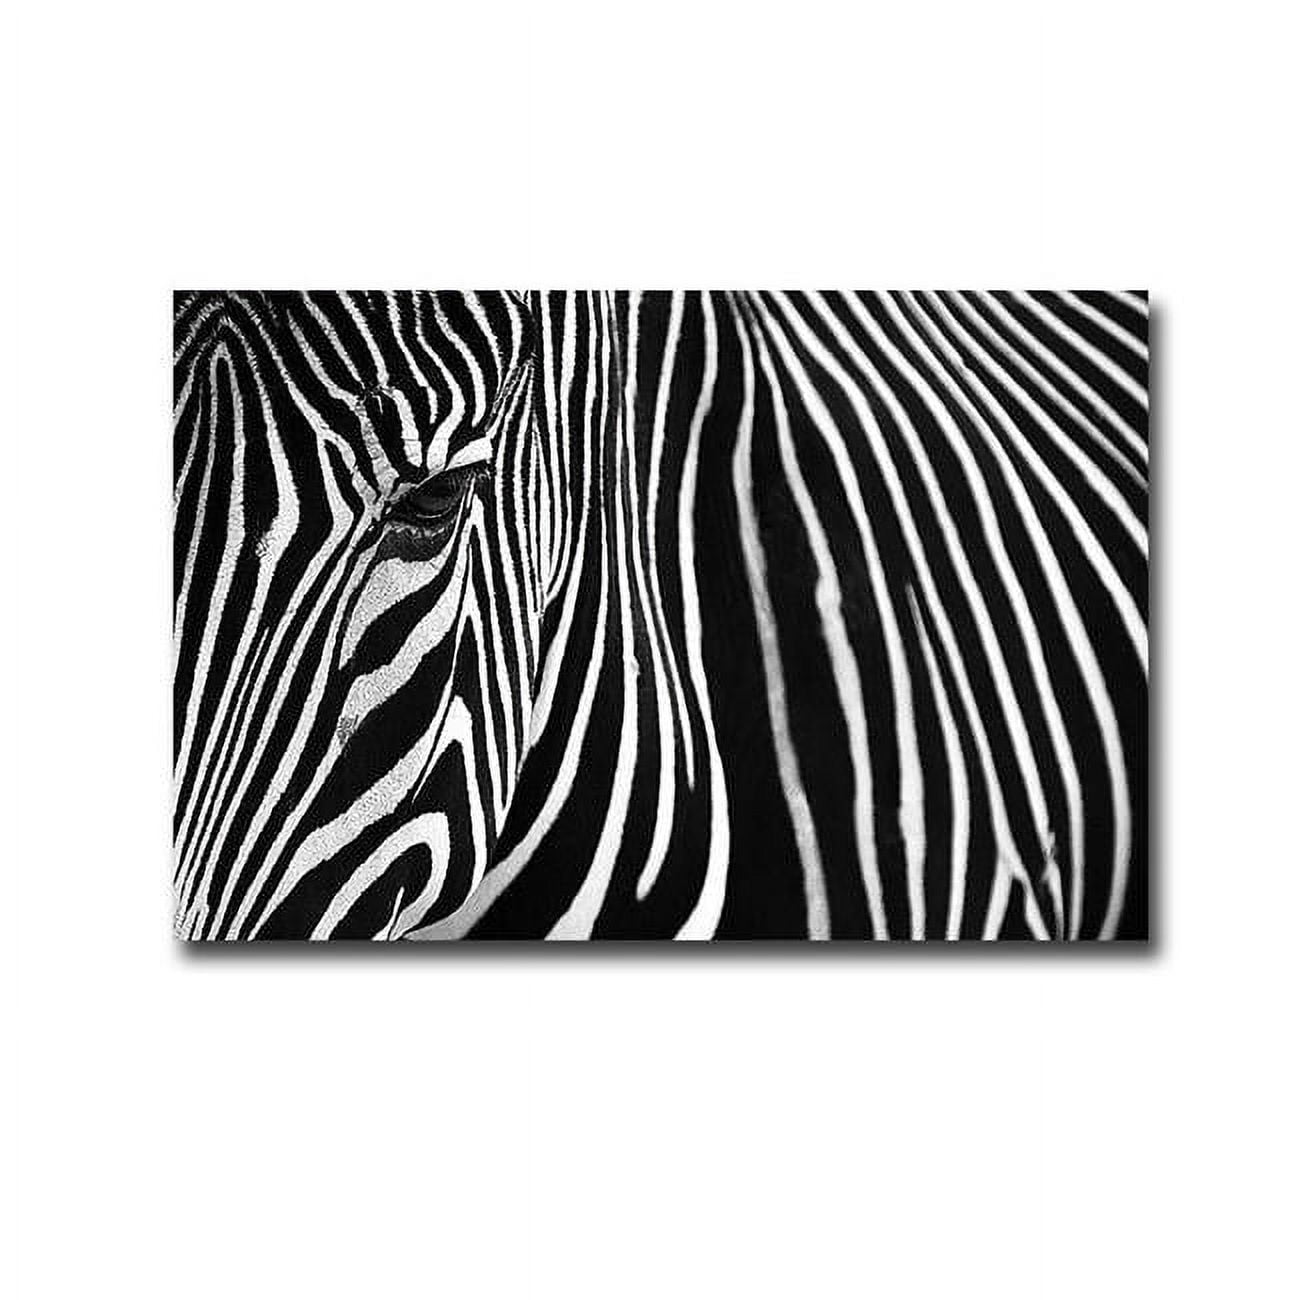 1218j558ig Zebra In The Lisbon Zoo By Andy Mumford Premium Gallery-wrapped Canvas Giclee Art - 12 X 18 X 1.5 In.